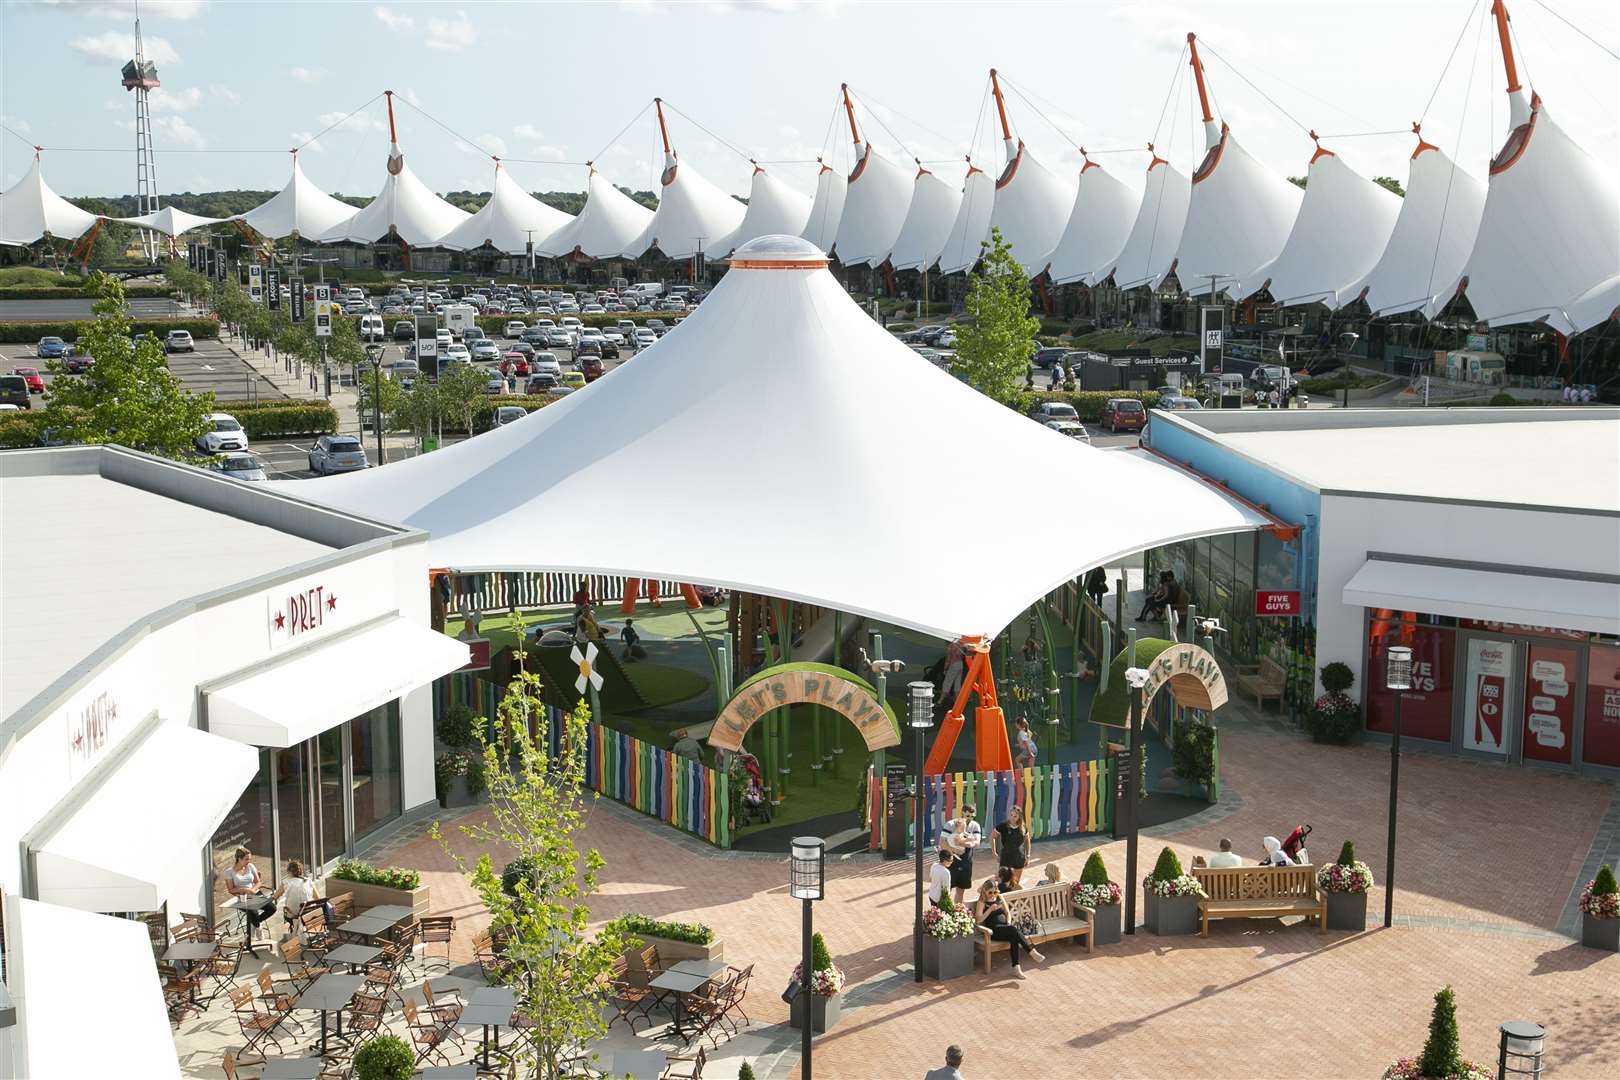 The Ashford Designer Outlet extension is set to officially open in two weeks